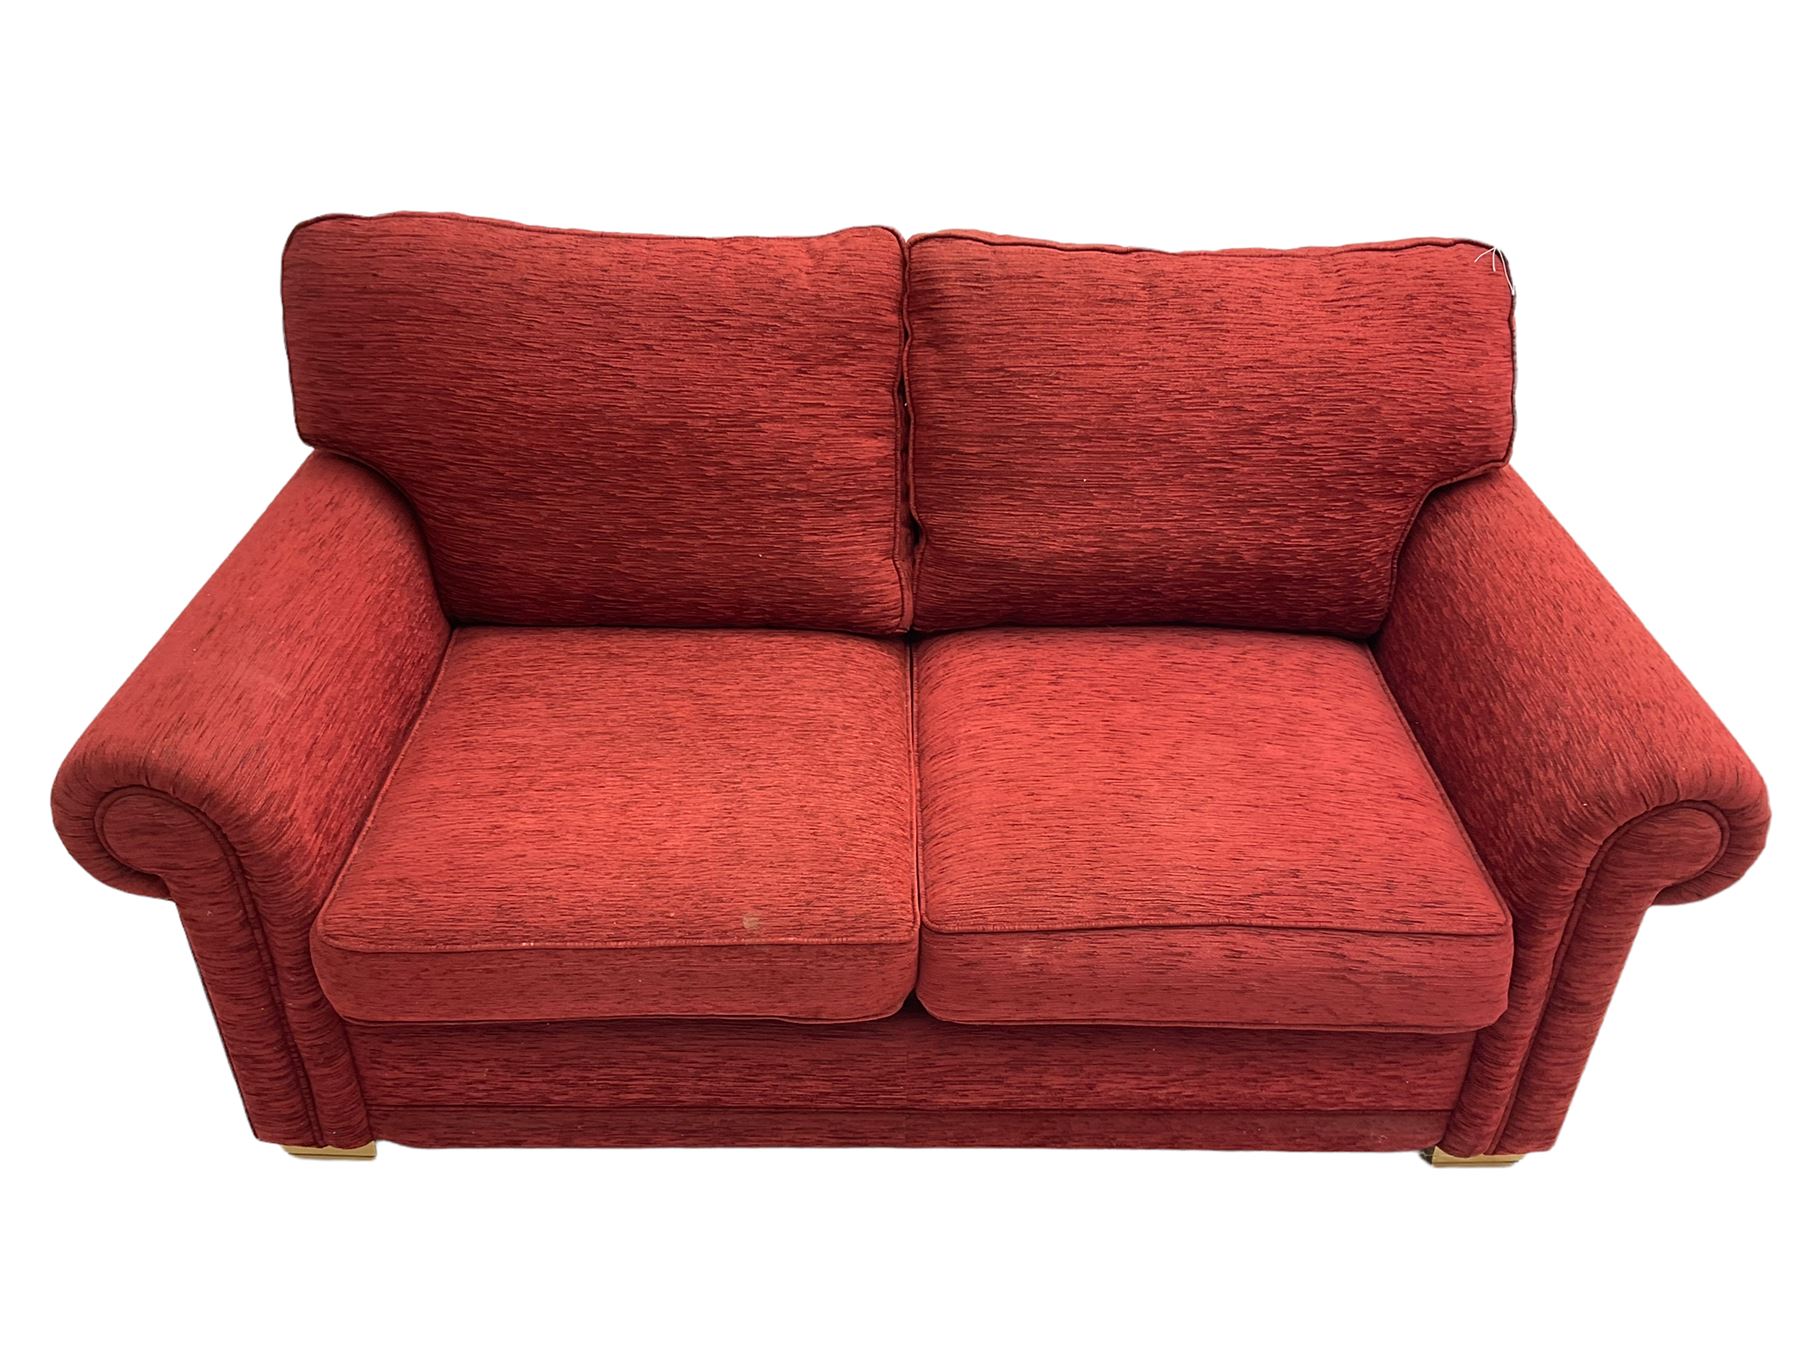 Two seat metal actions sofa bed upholstered in red cover - Image 2 of 6